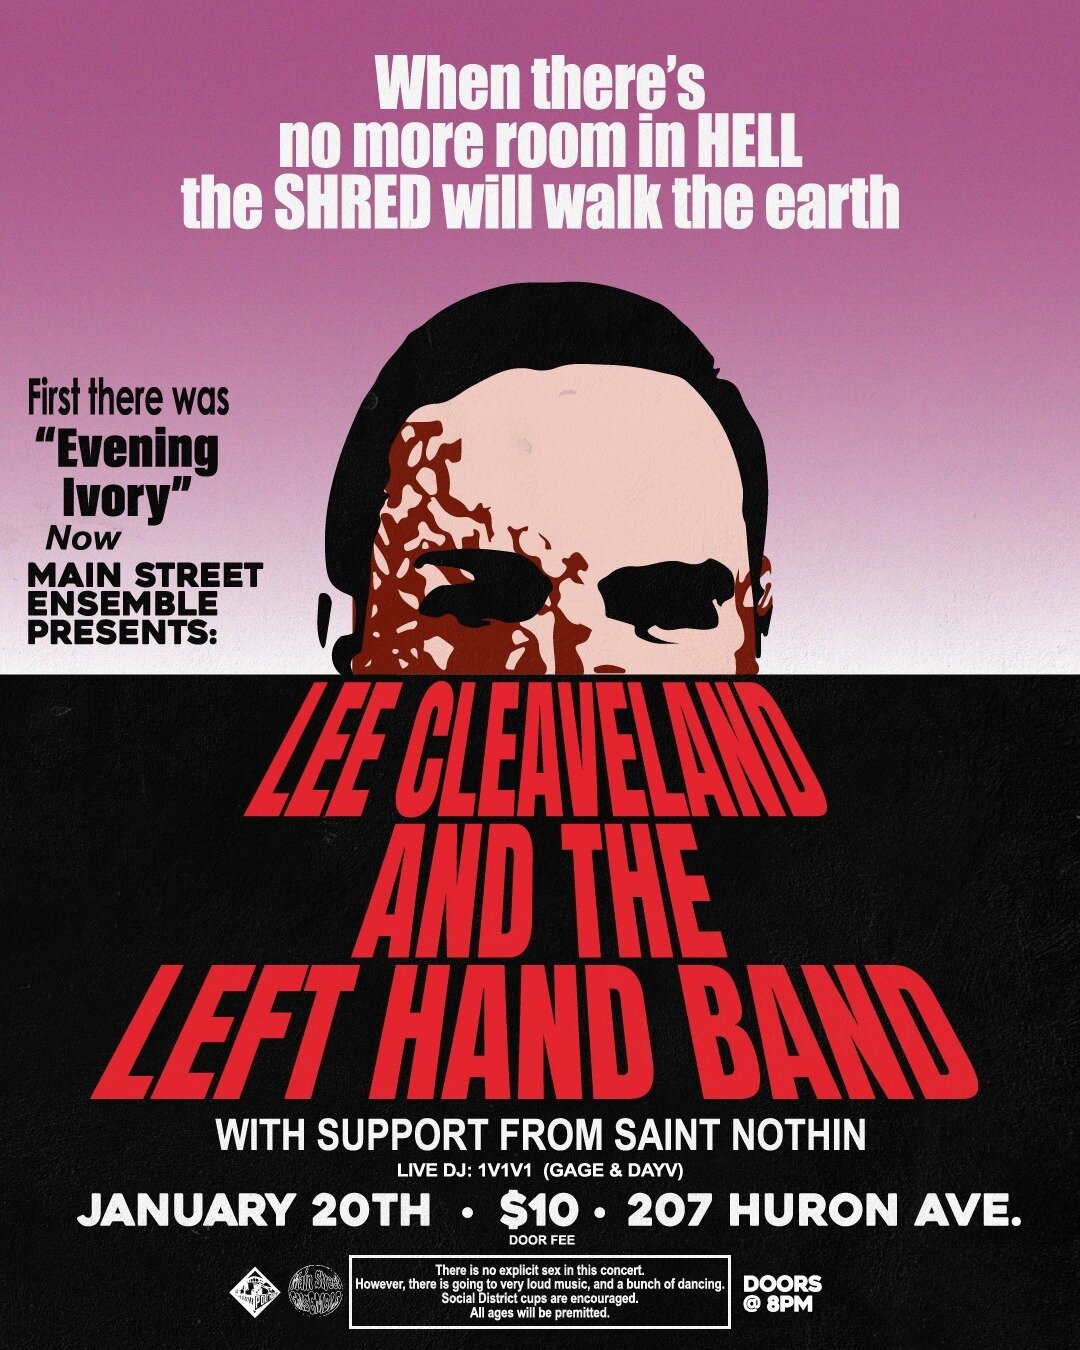 🔥CONCERTS AT MSE HAVE RETURNED🔥
This Saturday at MSE, we are bringing Lee Cleaveland and the Left Hand Band (Detroit) AND St. Nothin (Port Huron) to the MSE stage with DJs 1V1V1 (Gage &amp; Dayv ((David).
$10 at the door OR
For every pre-sale ticke